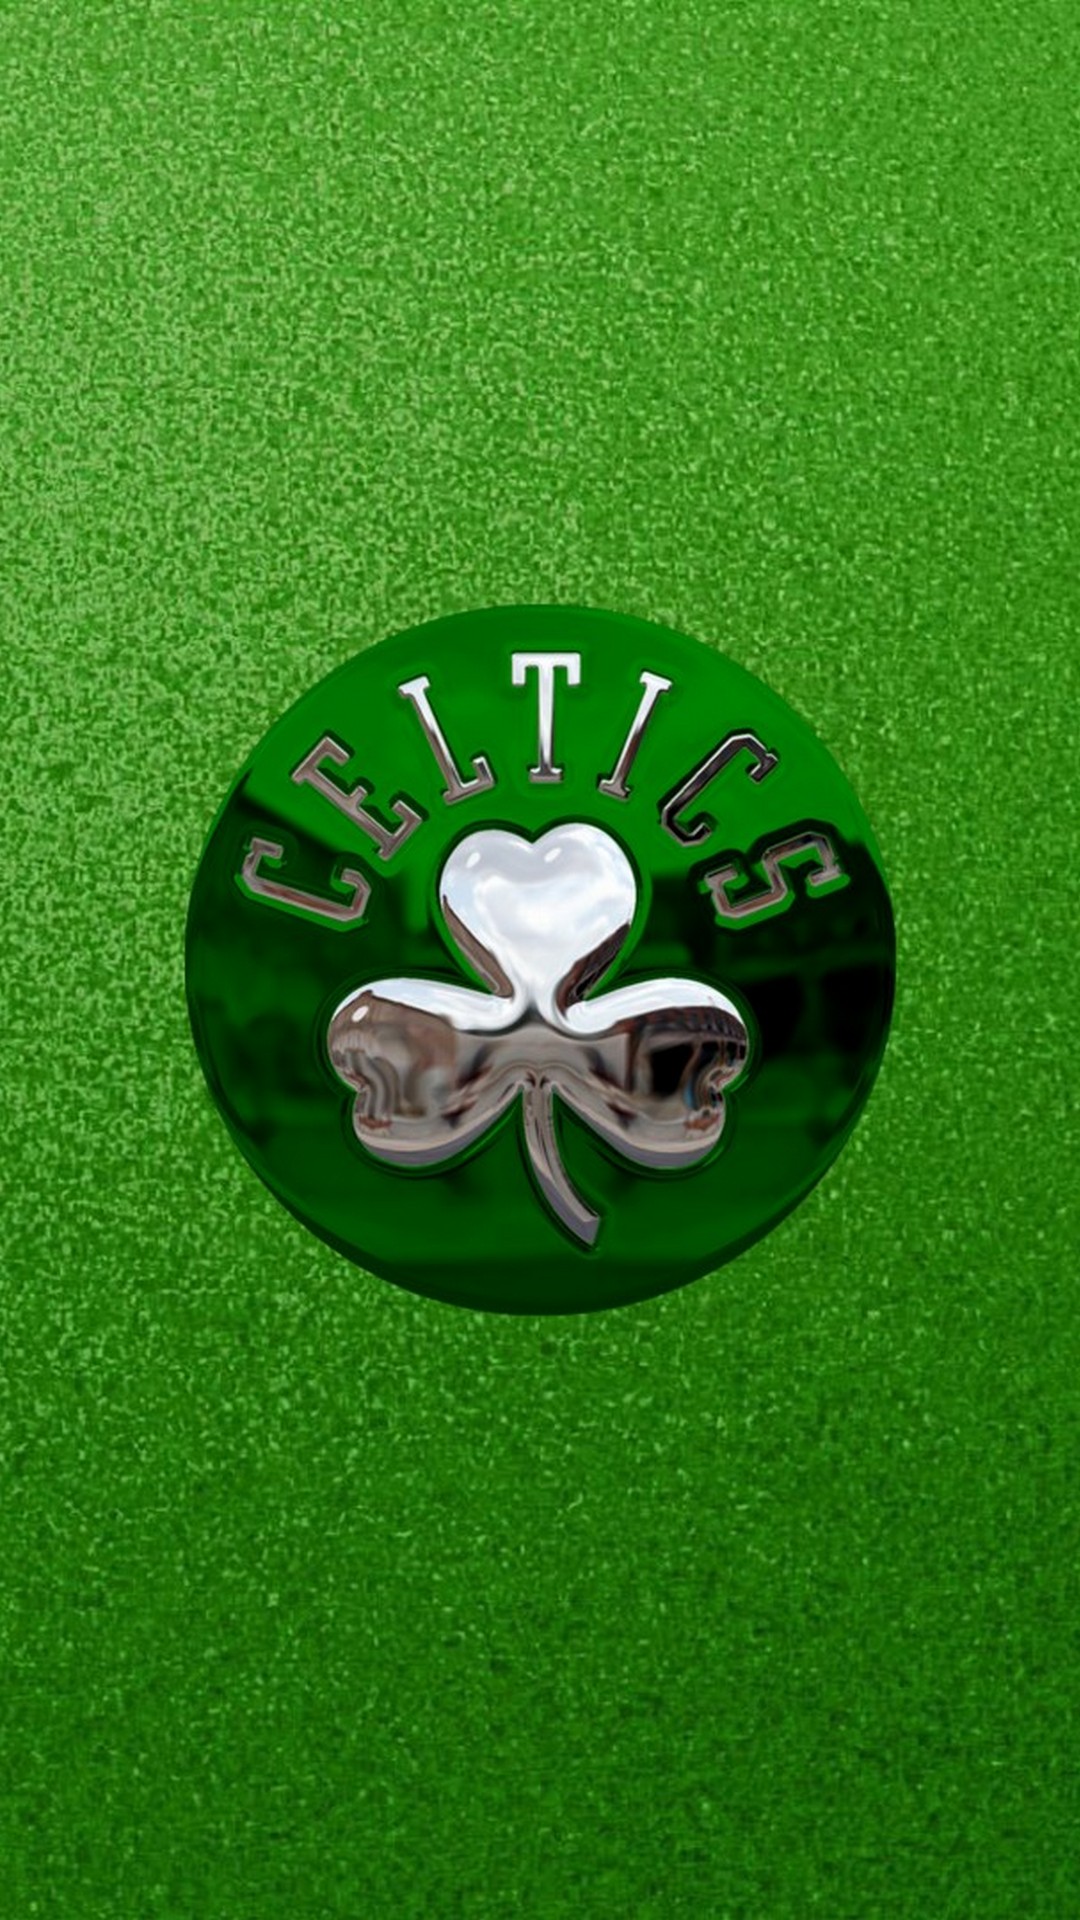 Wallpaper Boston Celtics Mobile with image resolution 1080x1920 pixel. You can make this wallpaper for your Desktop Computer Backgrounds, Mac Wallpapers, Android Lock screen or iPhone Screensavers